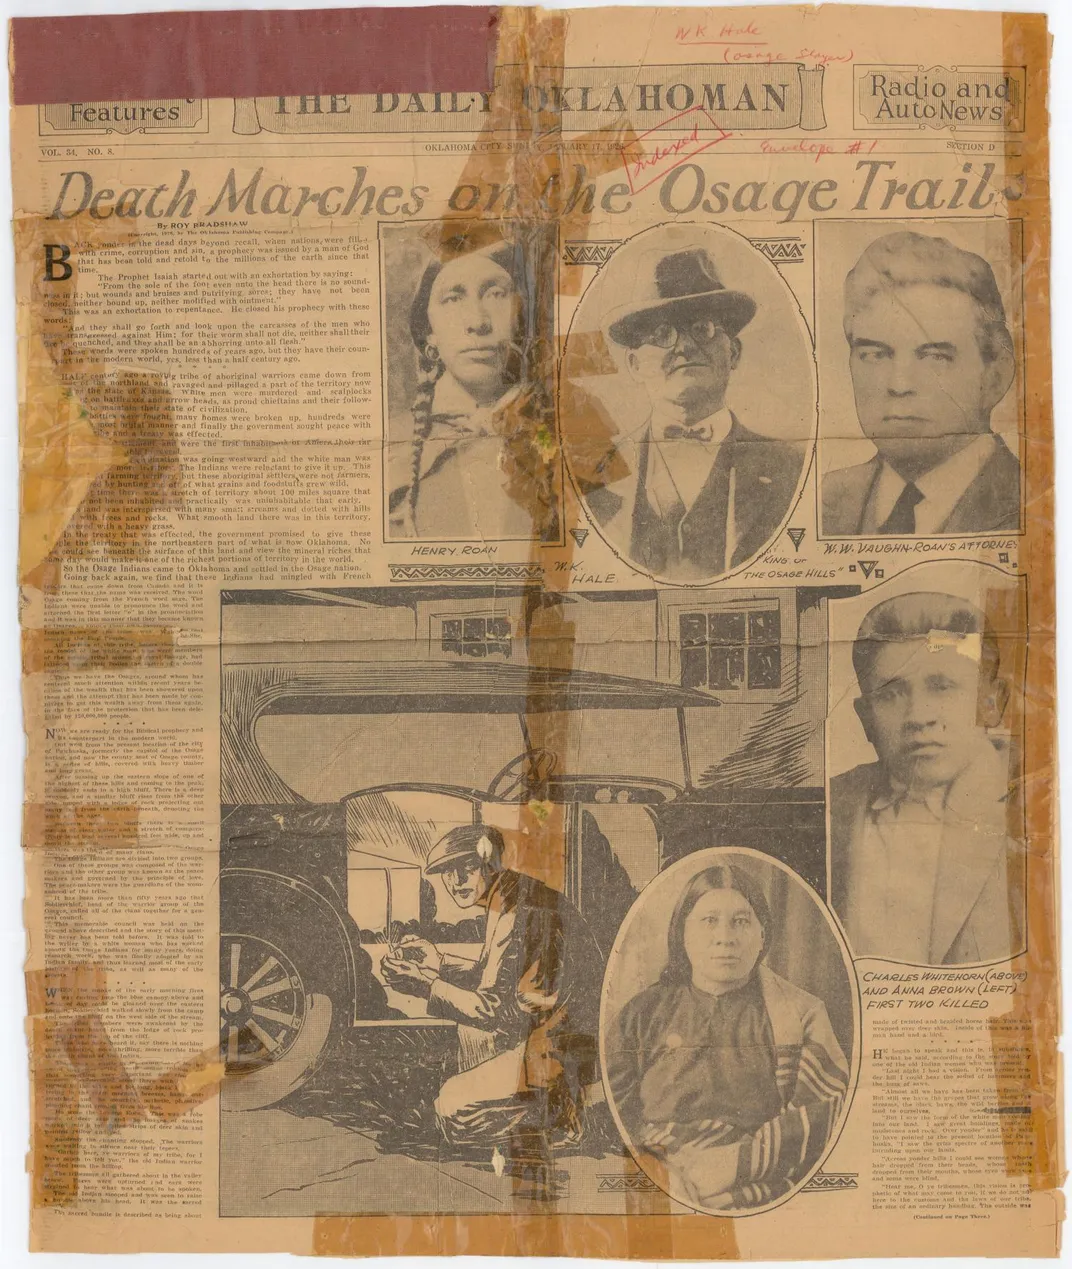 A 1926 newspaper article about the Osage murders, featuring photos of Henry Roan, William Hale, W.W. Vaughan, Charles Whitehorn and Anna Brown (clockwise from top left)